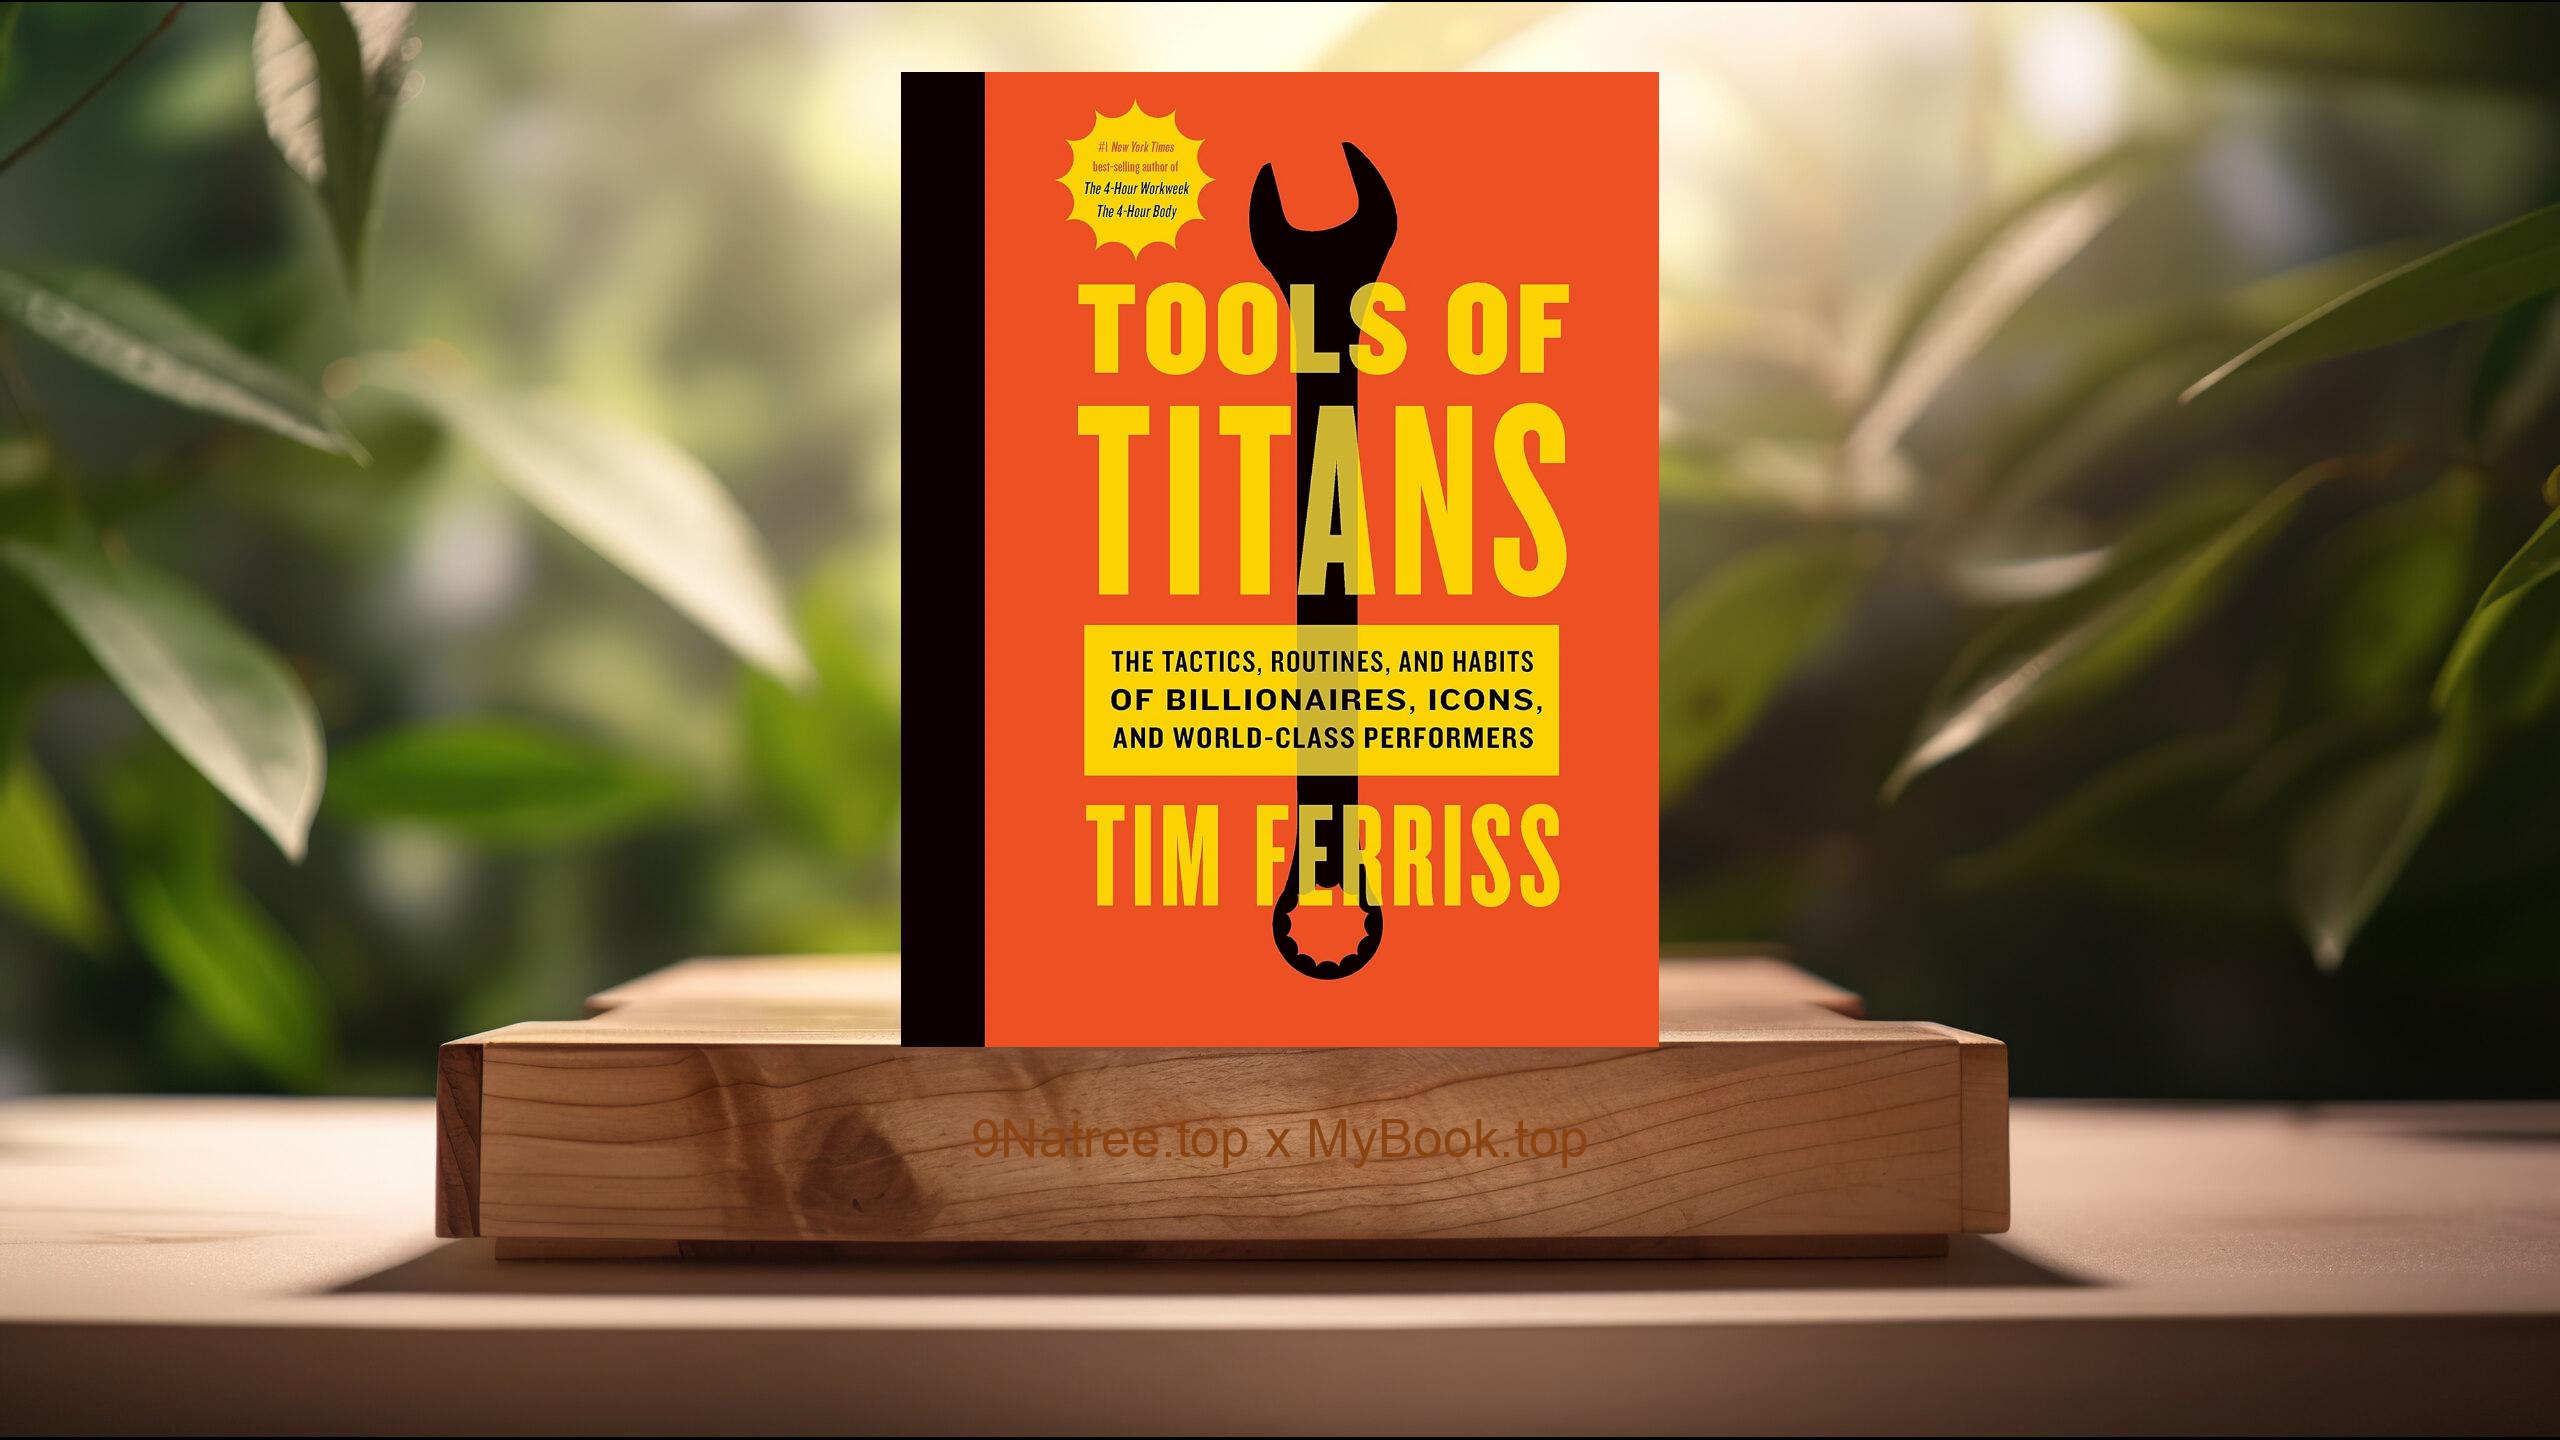 [Review] Tools Of Titans (Timothy Ferriss) Summarized